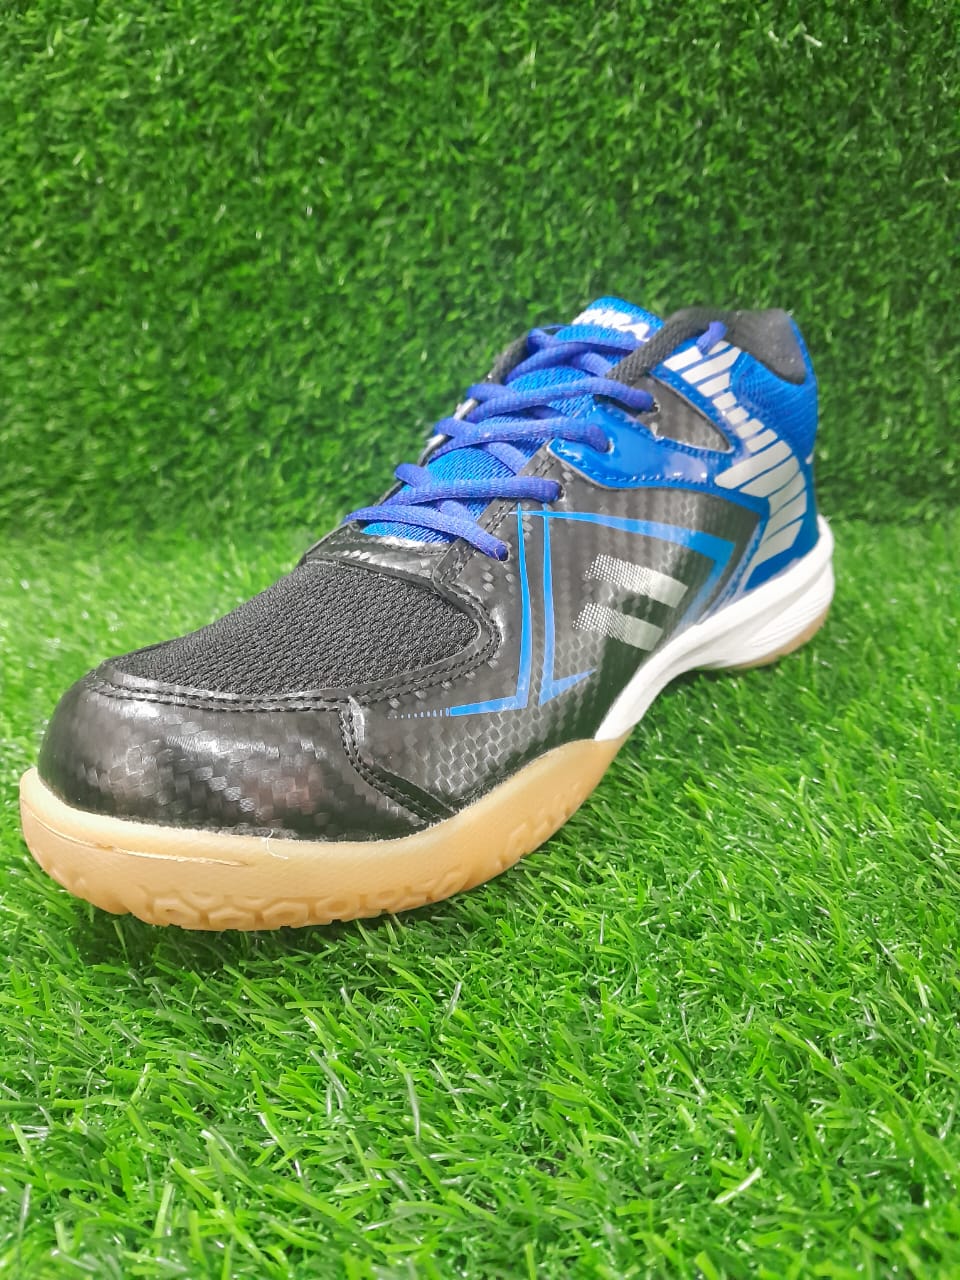 Thrax Court Power 008 Badminton Shoes Blue And Black